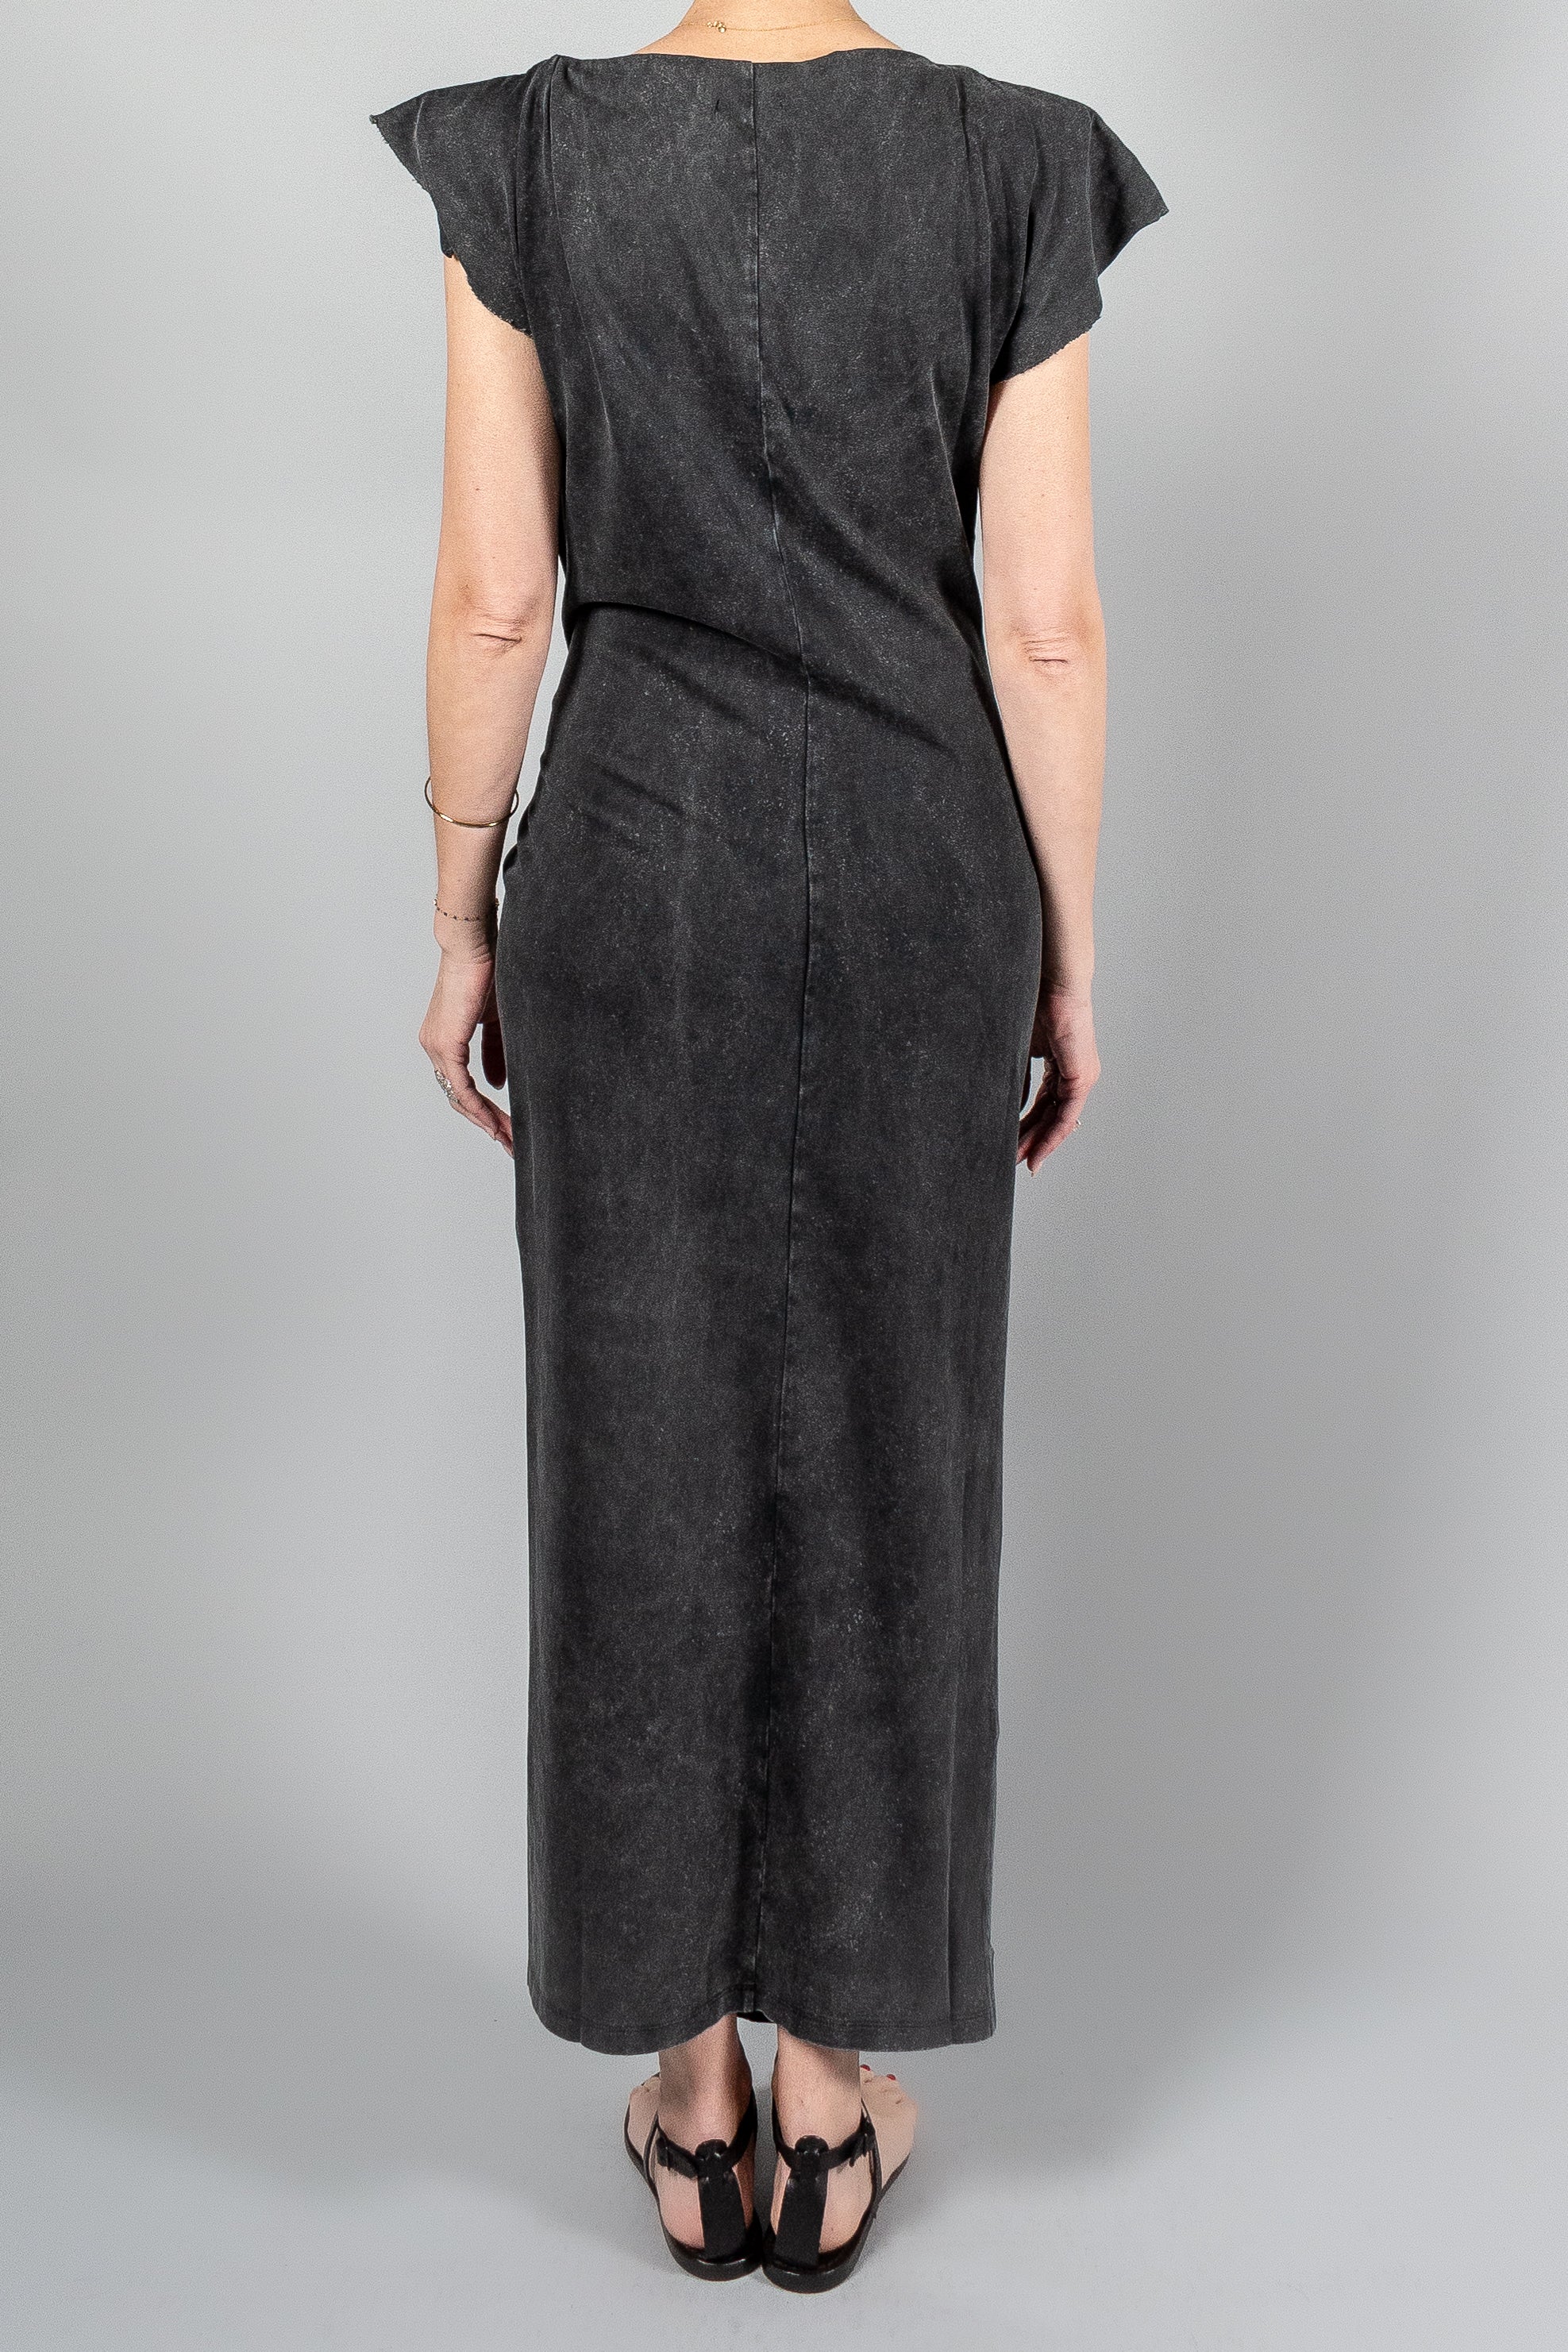 Isabel Marant Etoile Nadela Dress-Dresses and Jumpsuits-Misch-Boutique-Vancouver-Canada-misch.ca